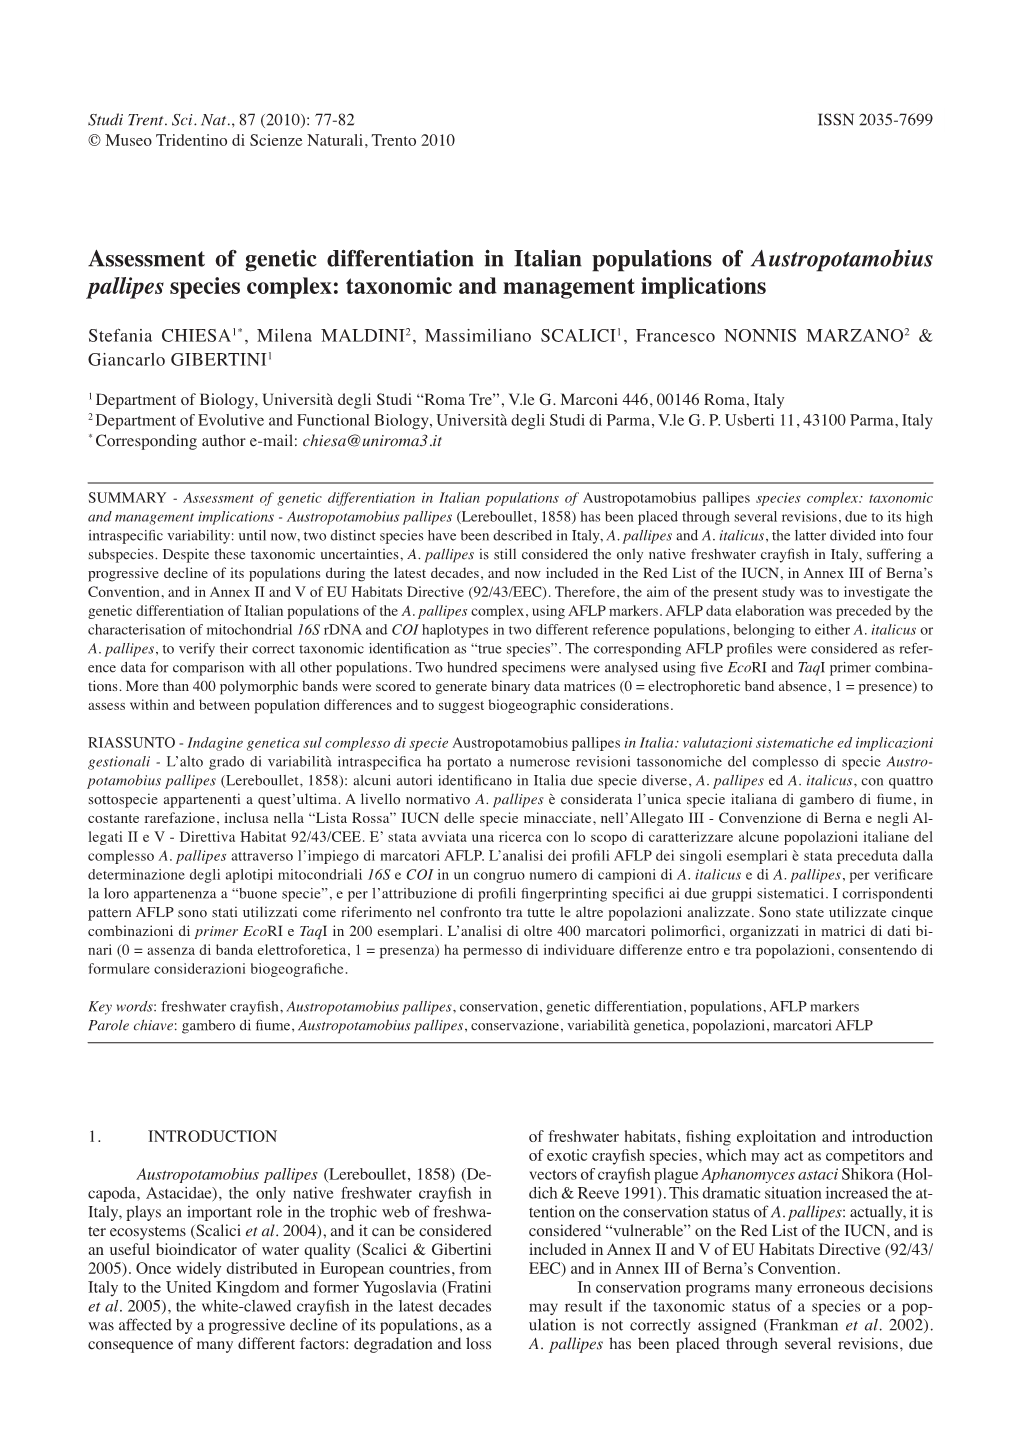 Assessment of Genetic Differentiation in Italian Populations of Austropotamobius Pallipes Species Complex: Taxonomic and Management Implications